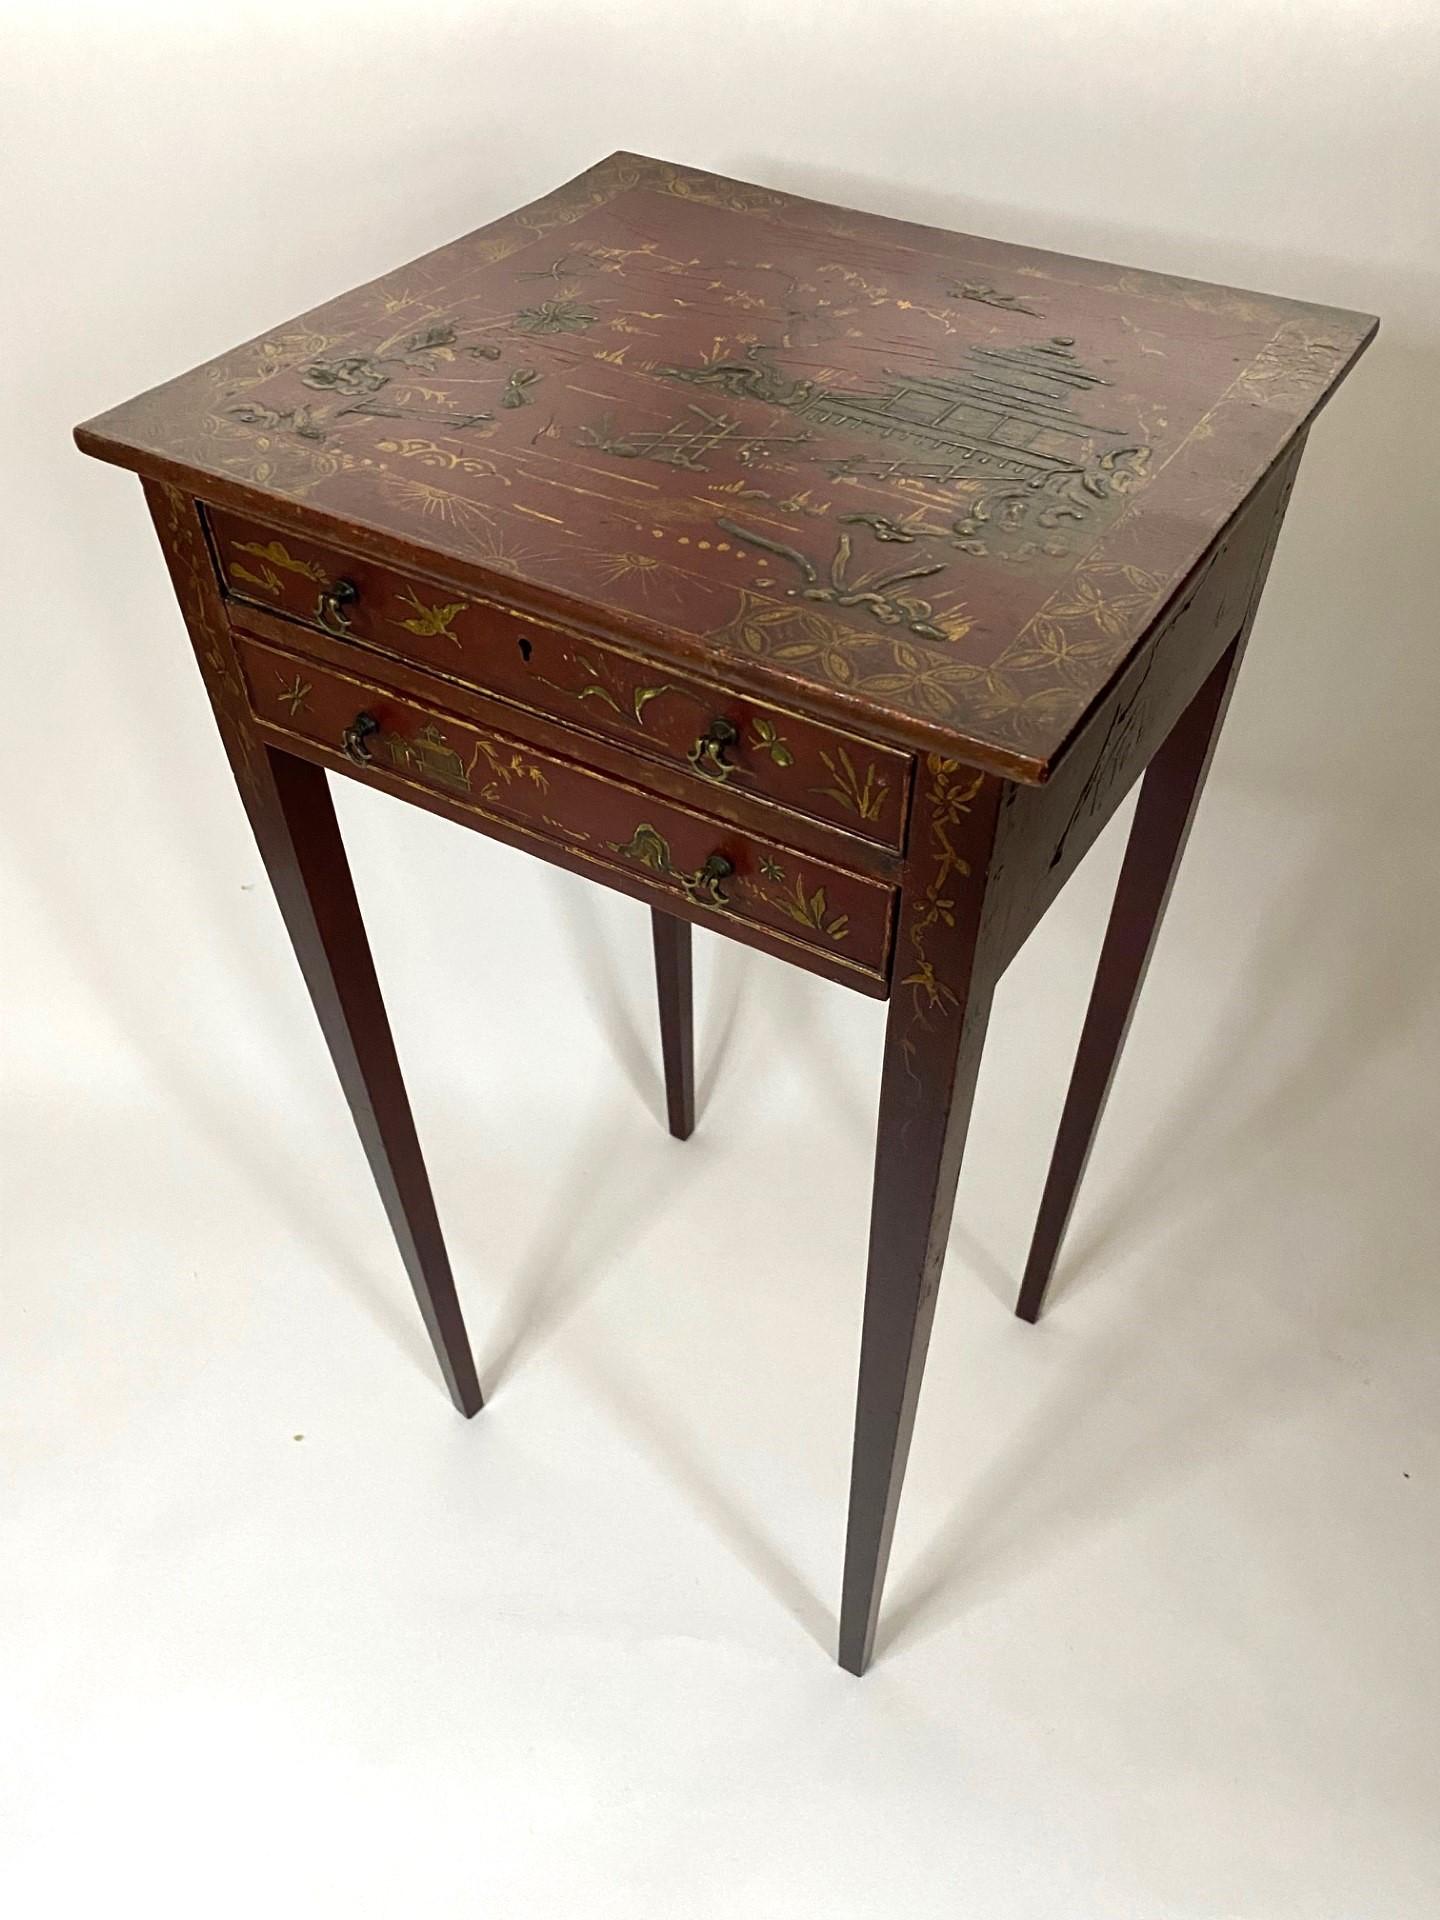 Interesting and attractive 19th century small two drawer red lacquered table with hand painted chinoiserie decoration on top and all sides on square tapered legs.